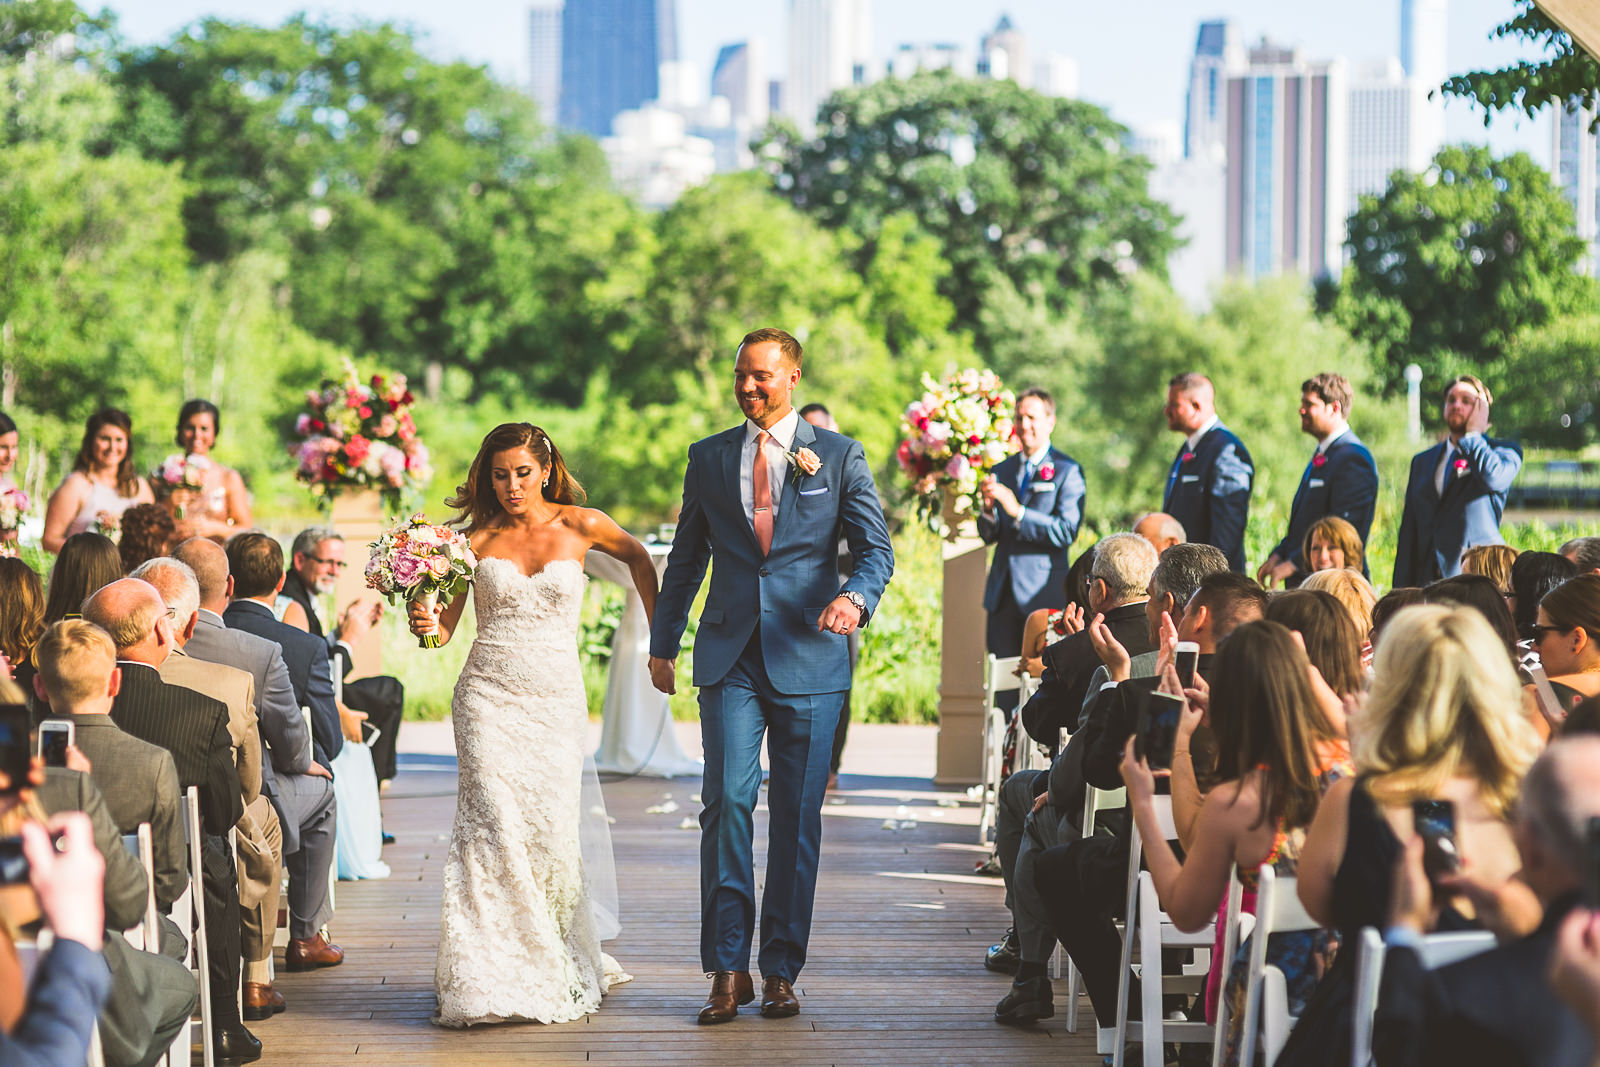 48 bride and groom married - Natalie + Alan // Chicago Wedding Photographer at Cafe Brauer